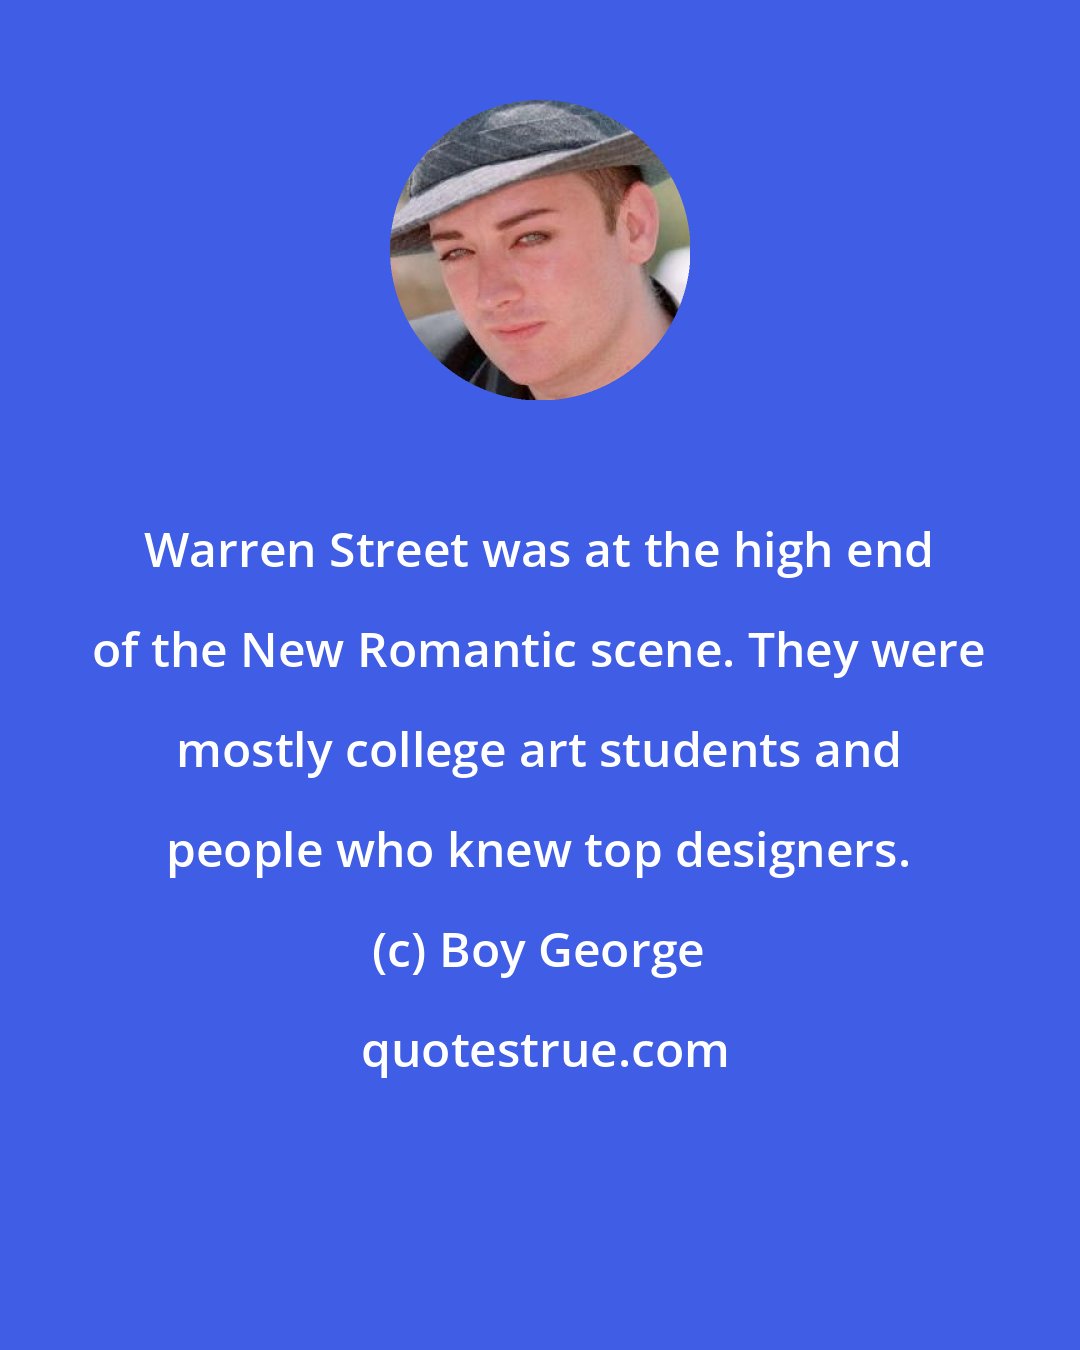 Boy George: Warren Street was at the high end of the New Romantic scene. They were mostly college art students and people who knew top designers.